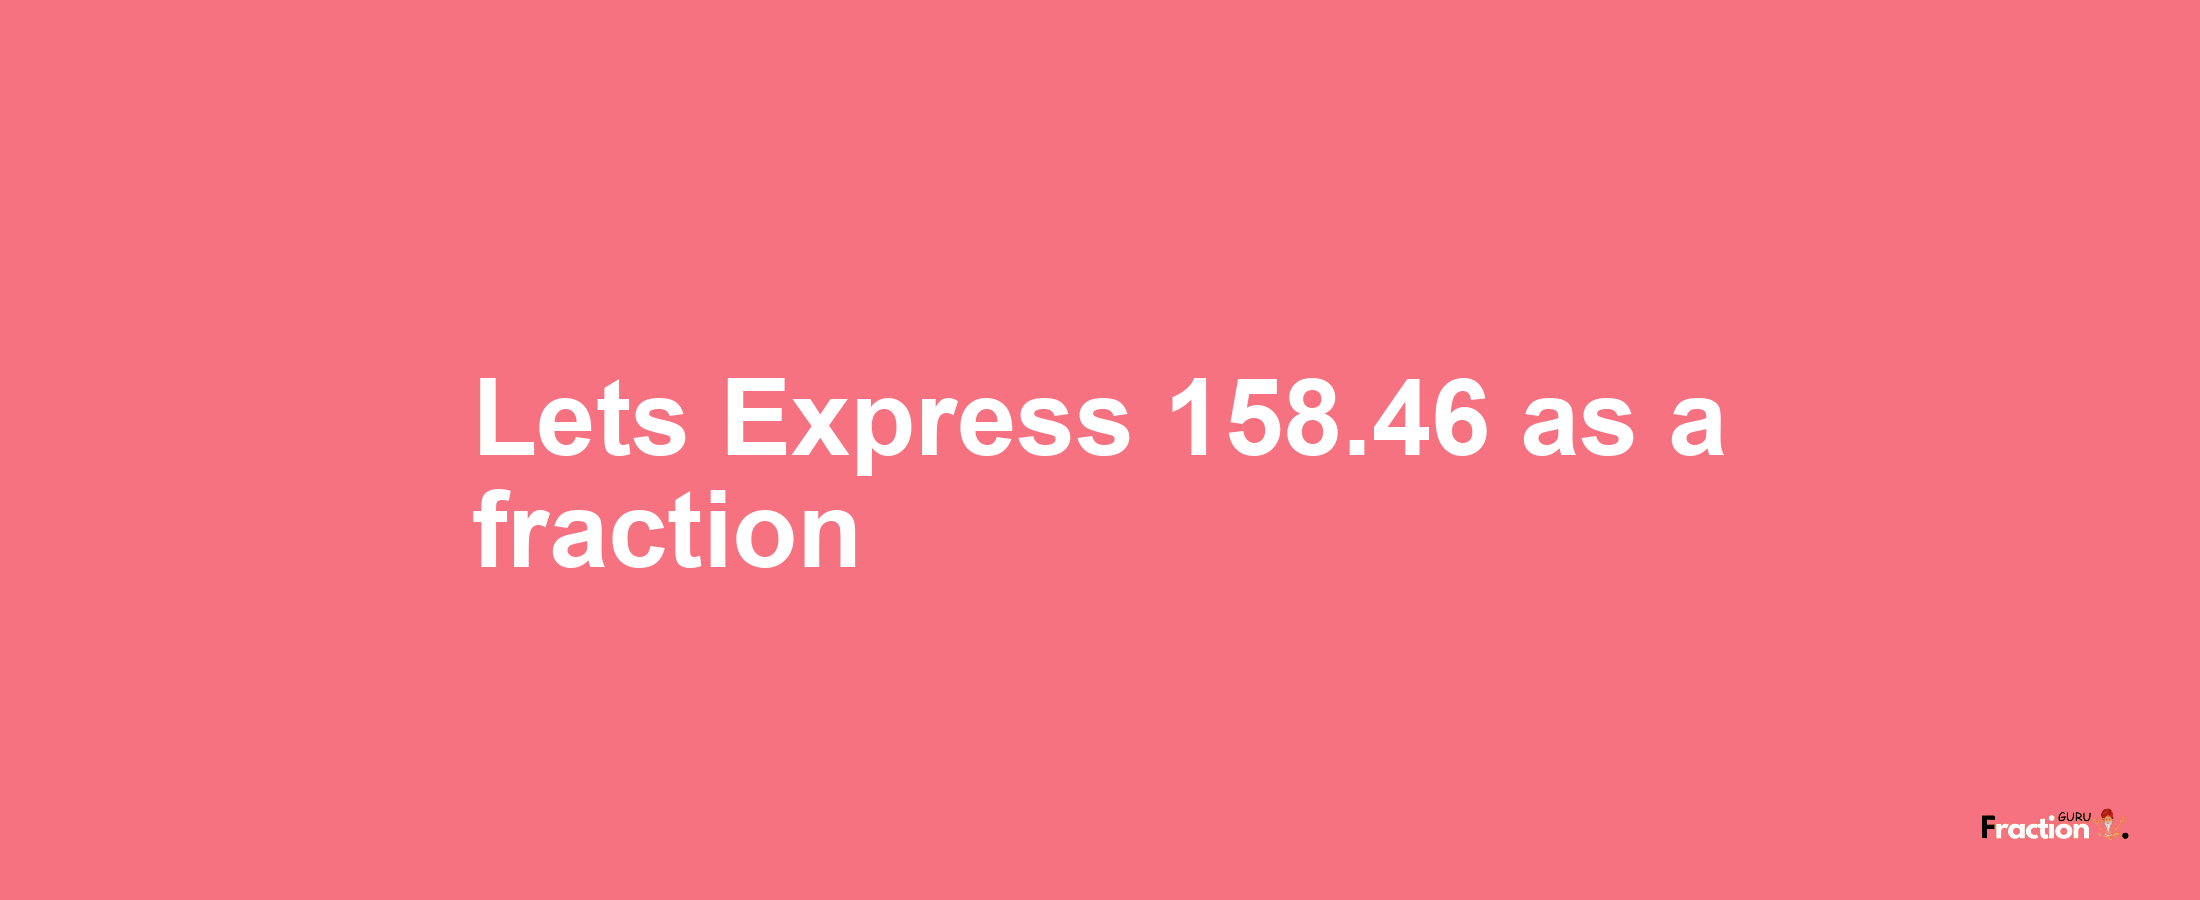 Lets Express 158.46 as afraction